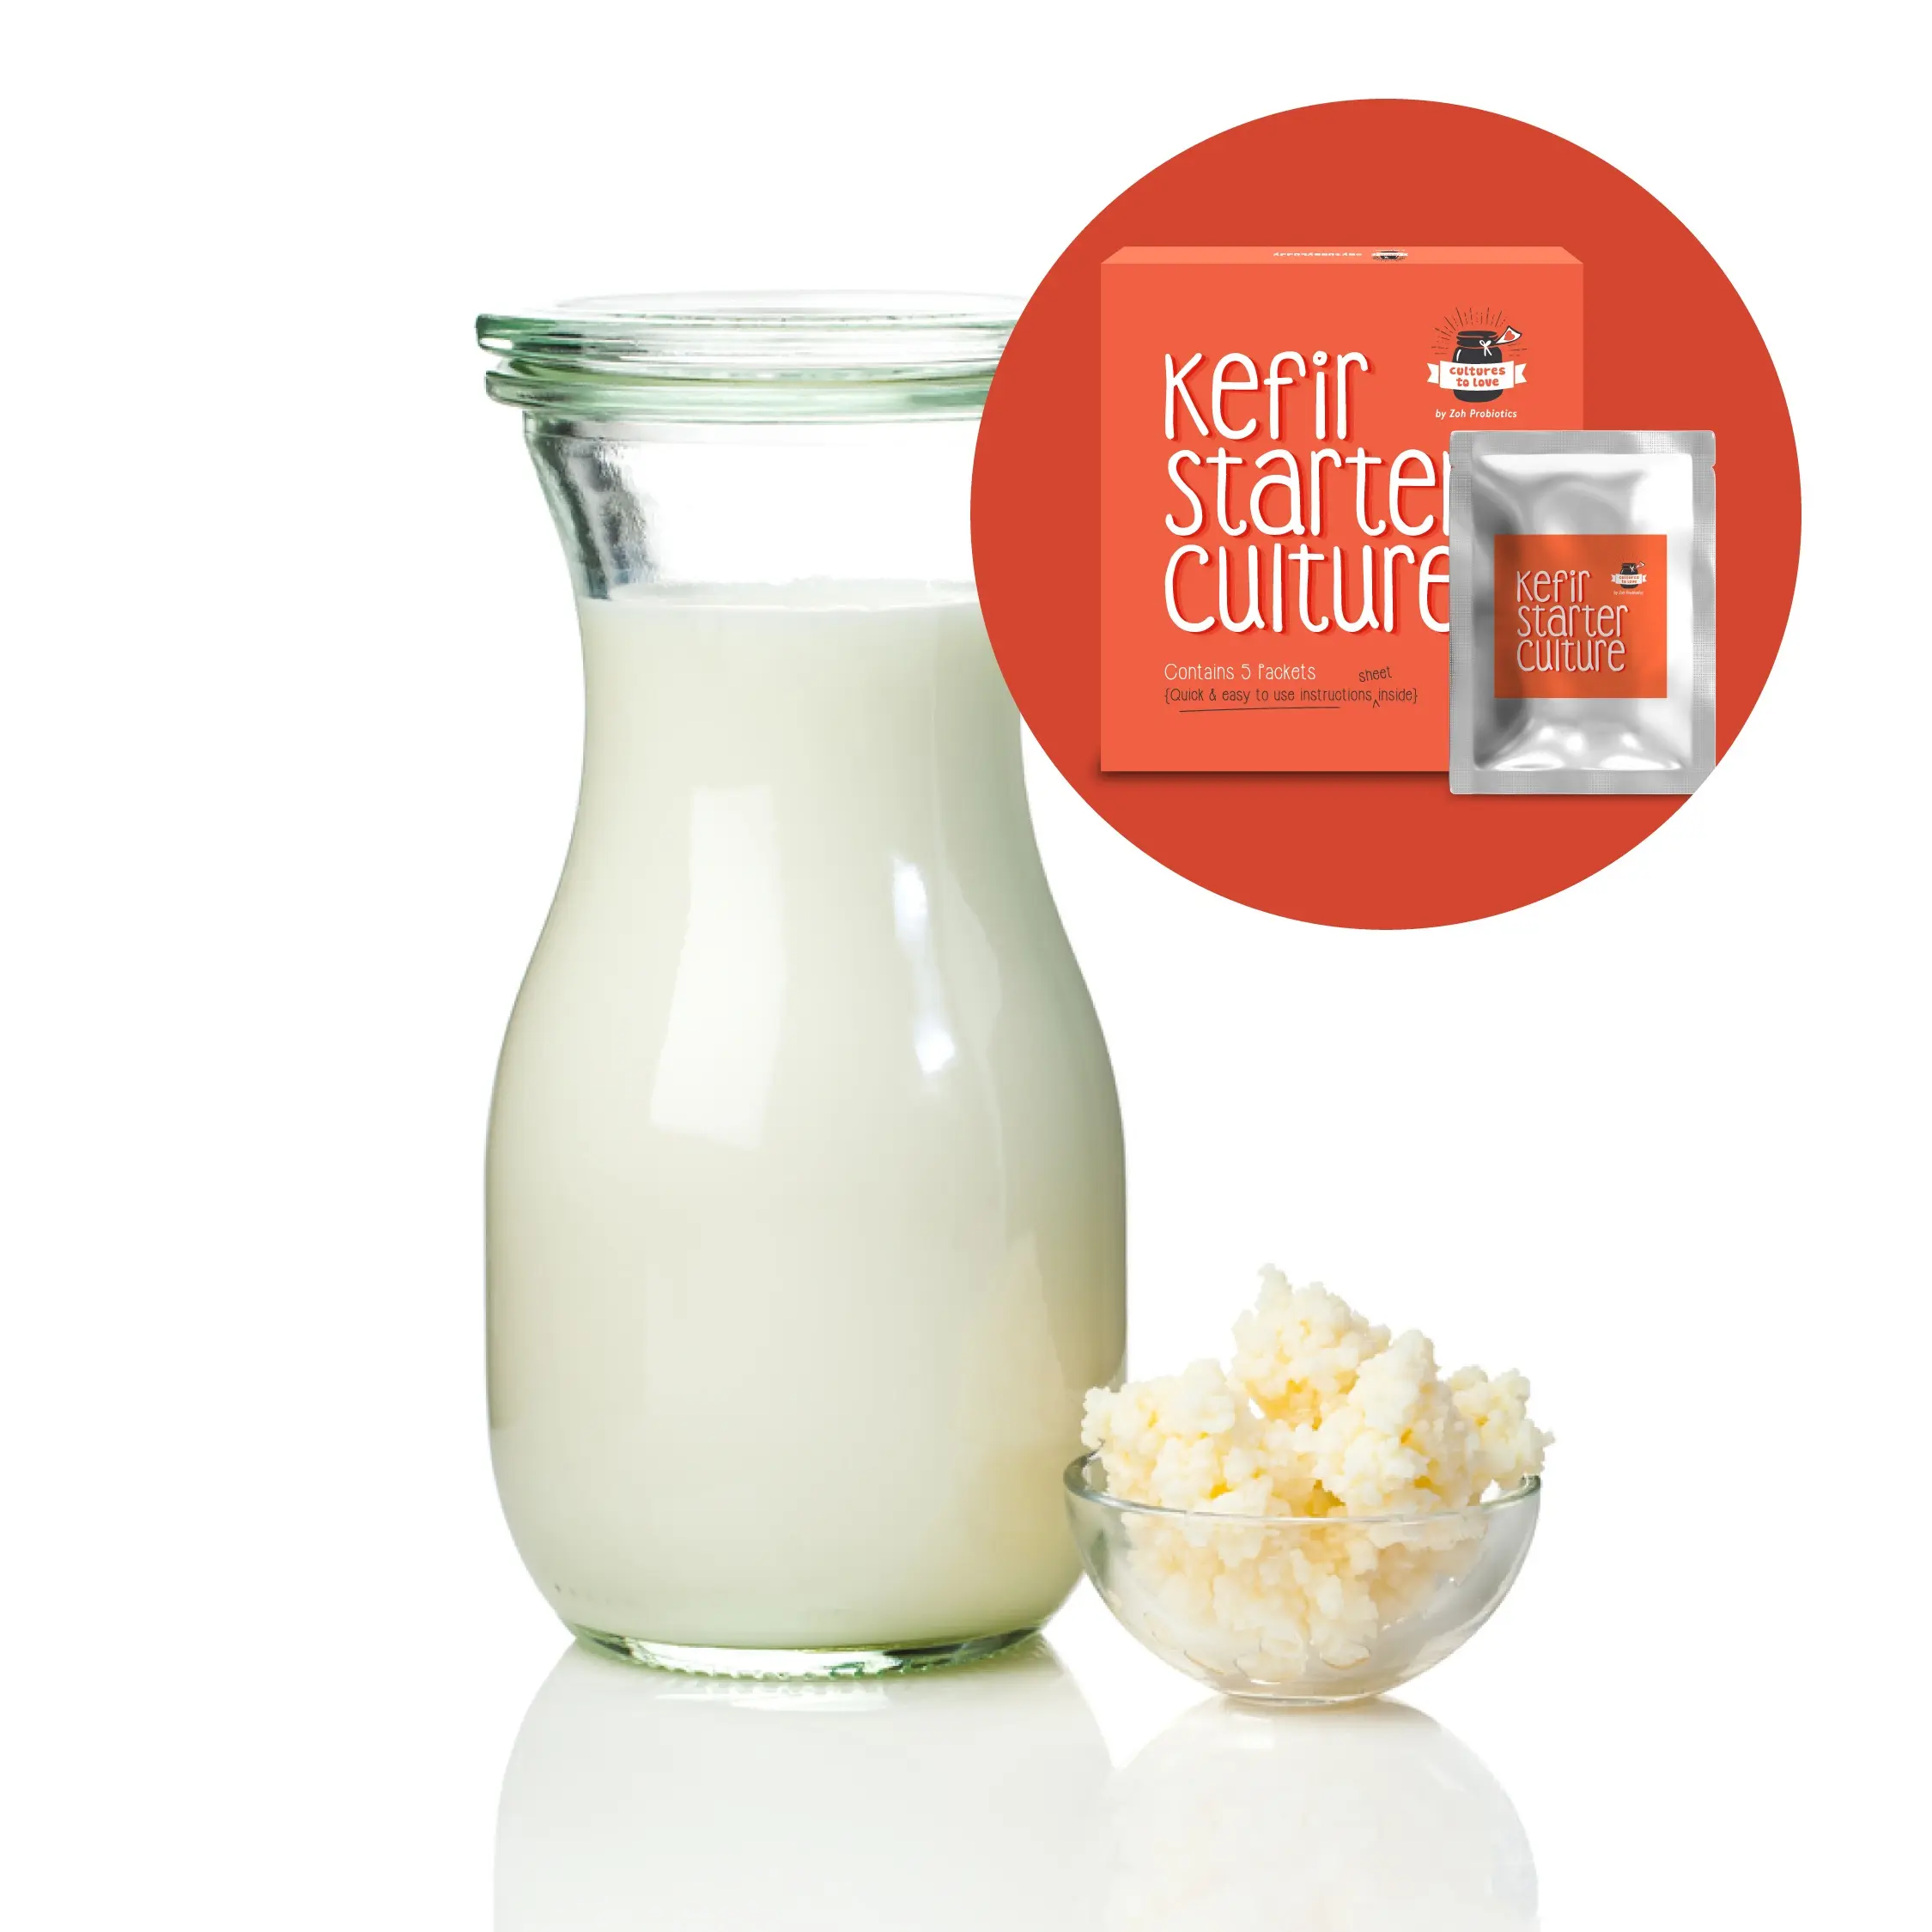 Best Selling Probiotic Culture Starter Kefir for Controlling Health Issues Available for Bulk Export from Indian Manufacturer